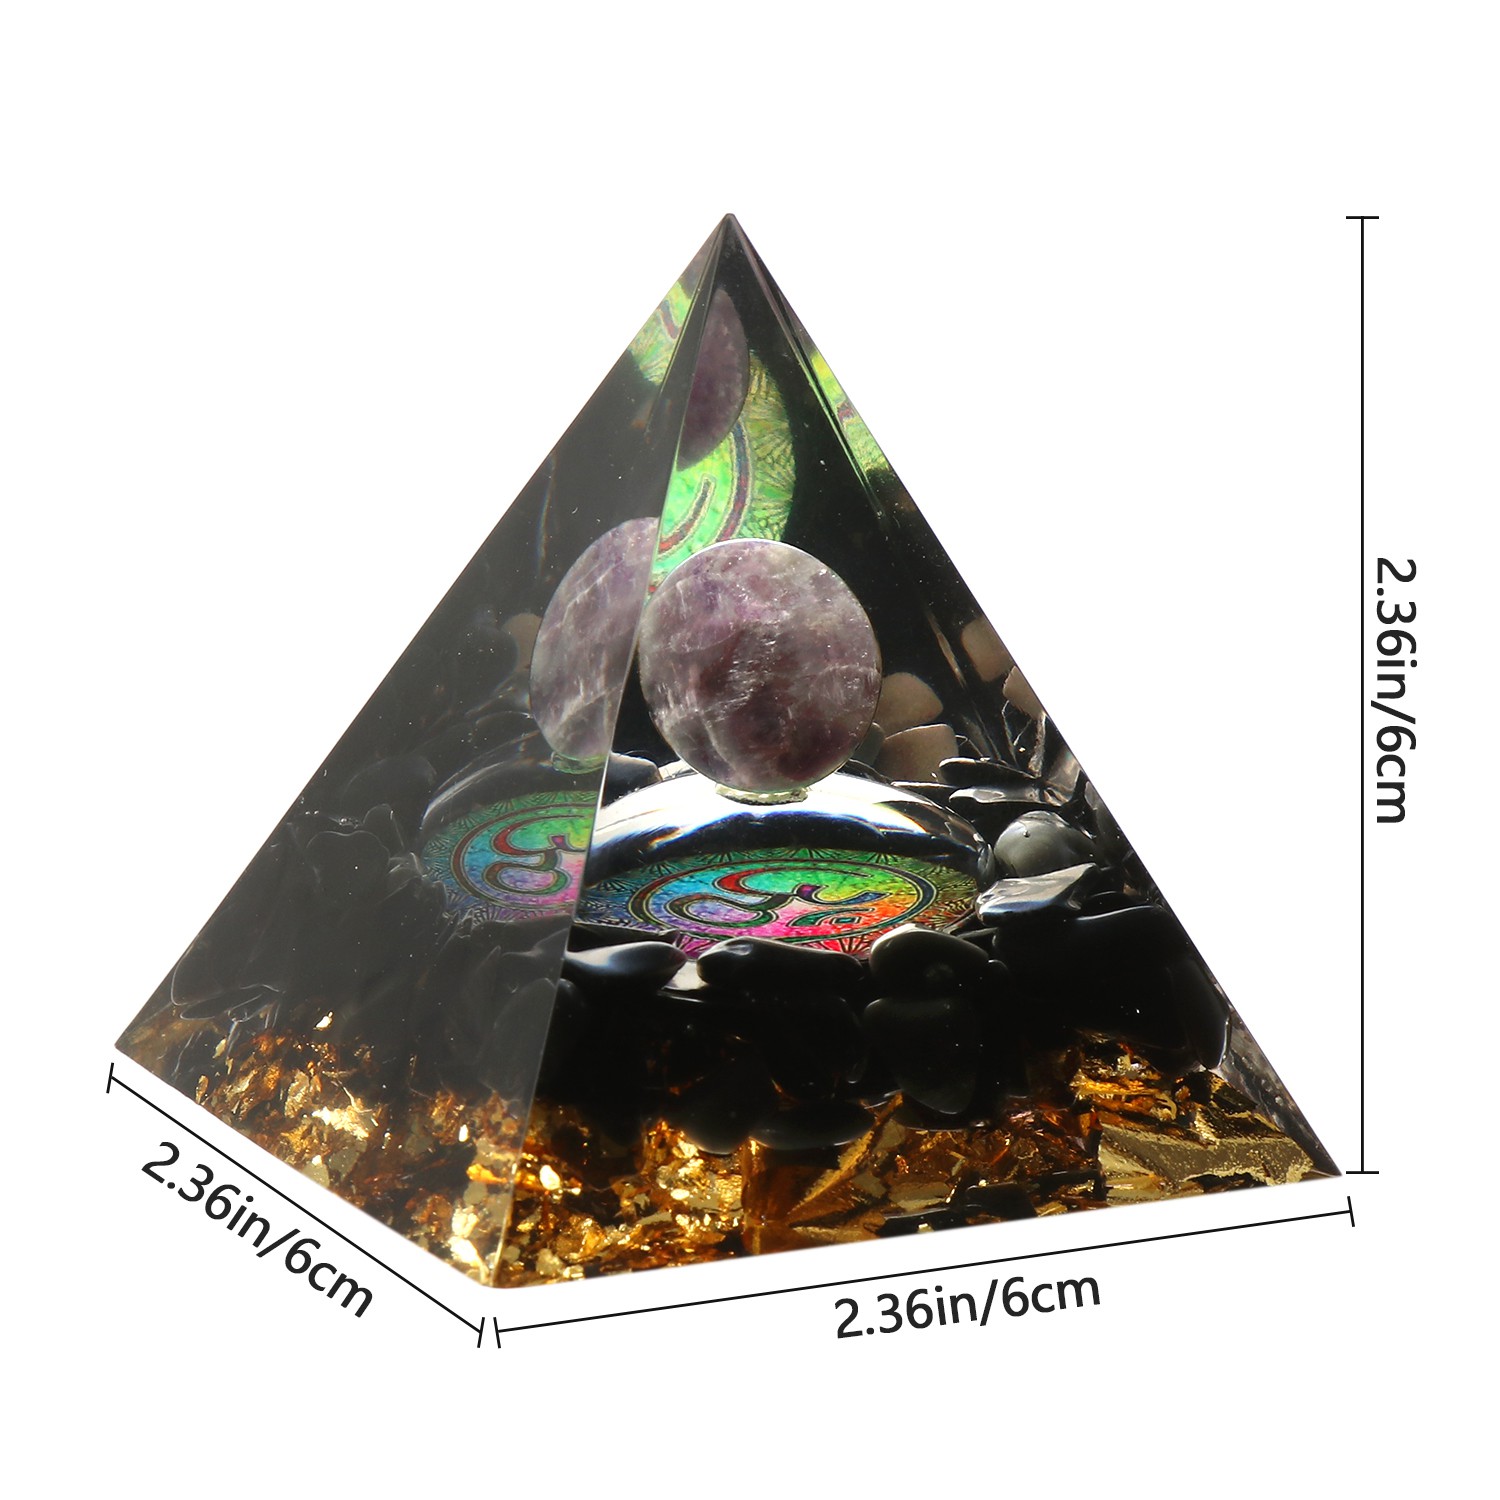 ❤LANSEL❤ Shelf Decor Orgone Pyramid Boost Immune System|Decor Positive Energy Generator Chakra|Orgonite Hand Craft Gifts for Women Spirtual Things with Obsidian|EMF Protection – Healing